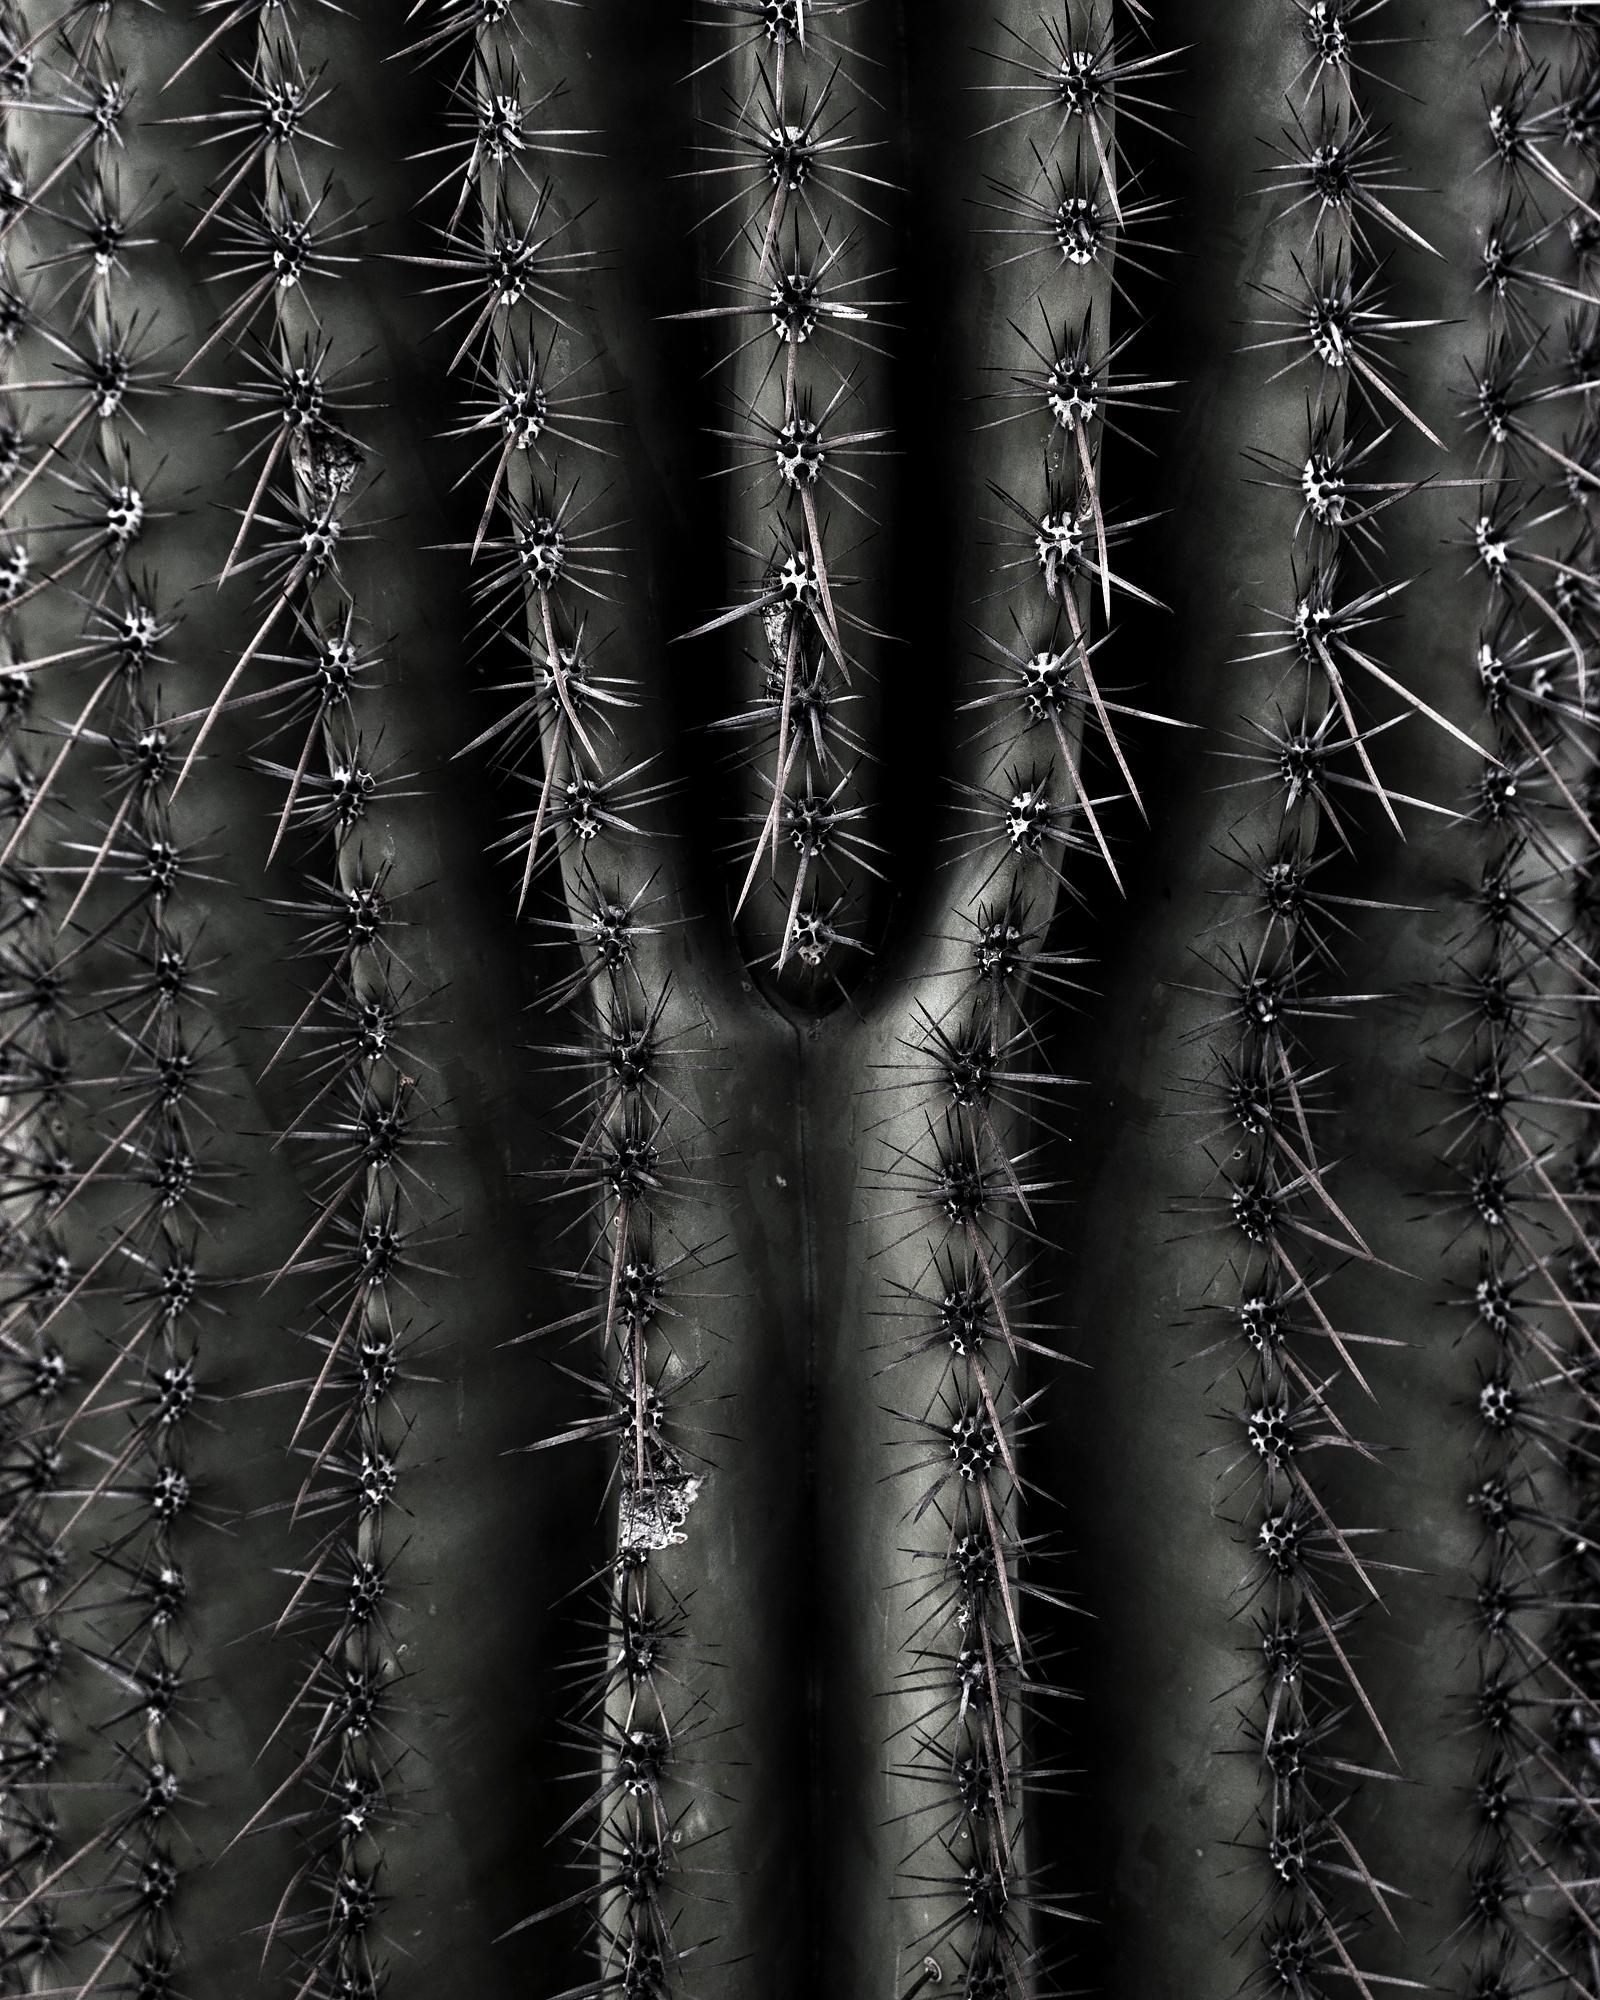 American Limited Edition Prints from Desert Bellows, A Saguaro Series by Andrew Johnson